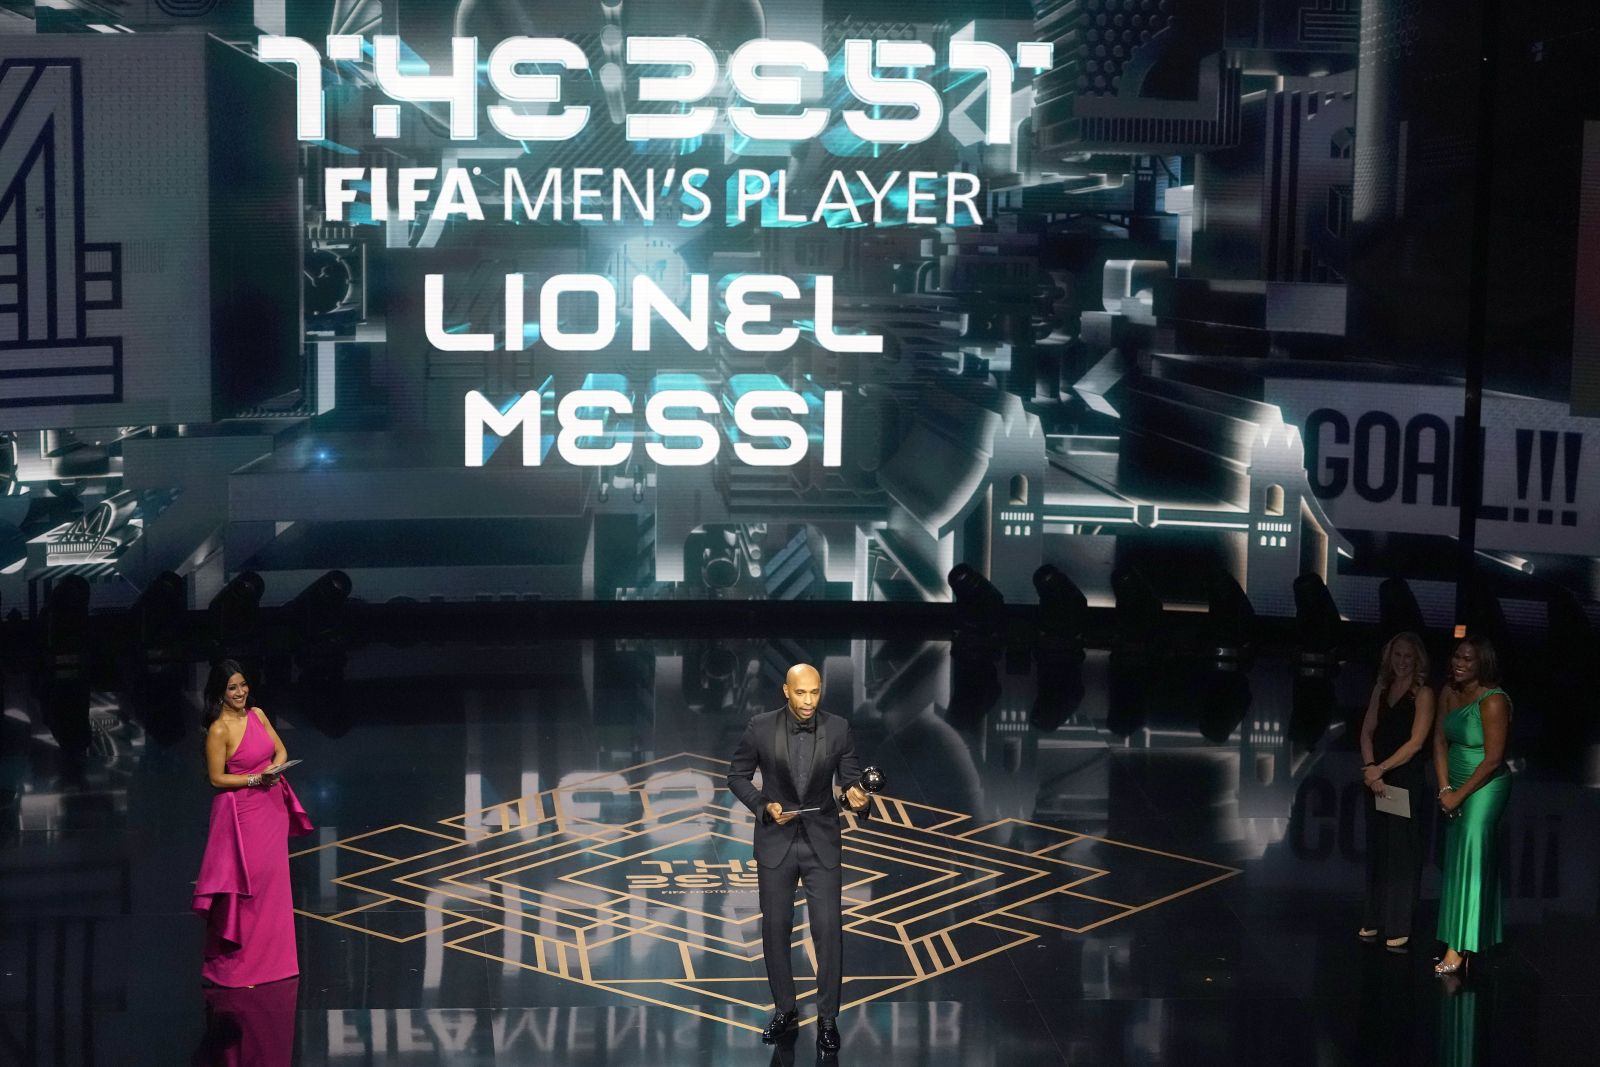 Former France soccer player Thierry Henry accepts on behalf of Argentina's Lionel Messi the Best Men's Player award during the FIFA Football Awards 2023 at the Eventim Apollo in Hammersmith, London, Monday, Jan. 15, 2024. (AP Photo/Kirsty Wigglesworth)